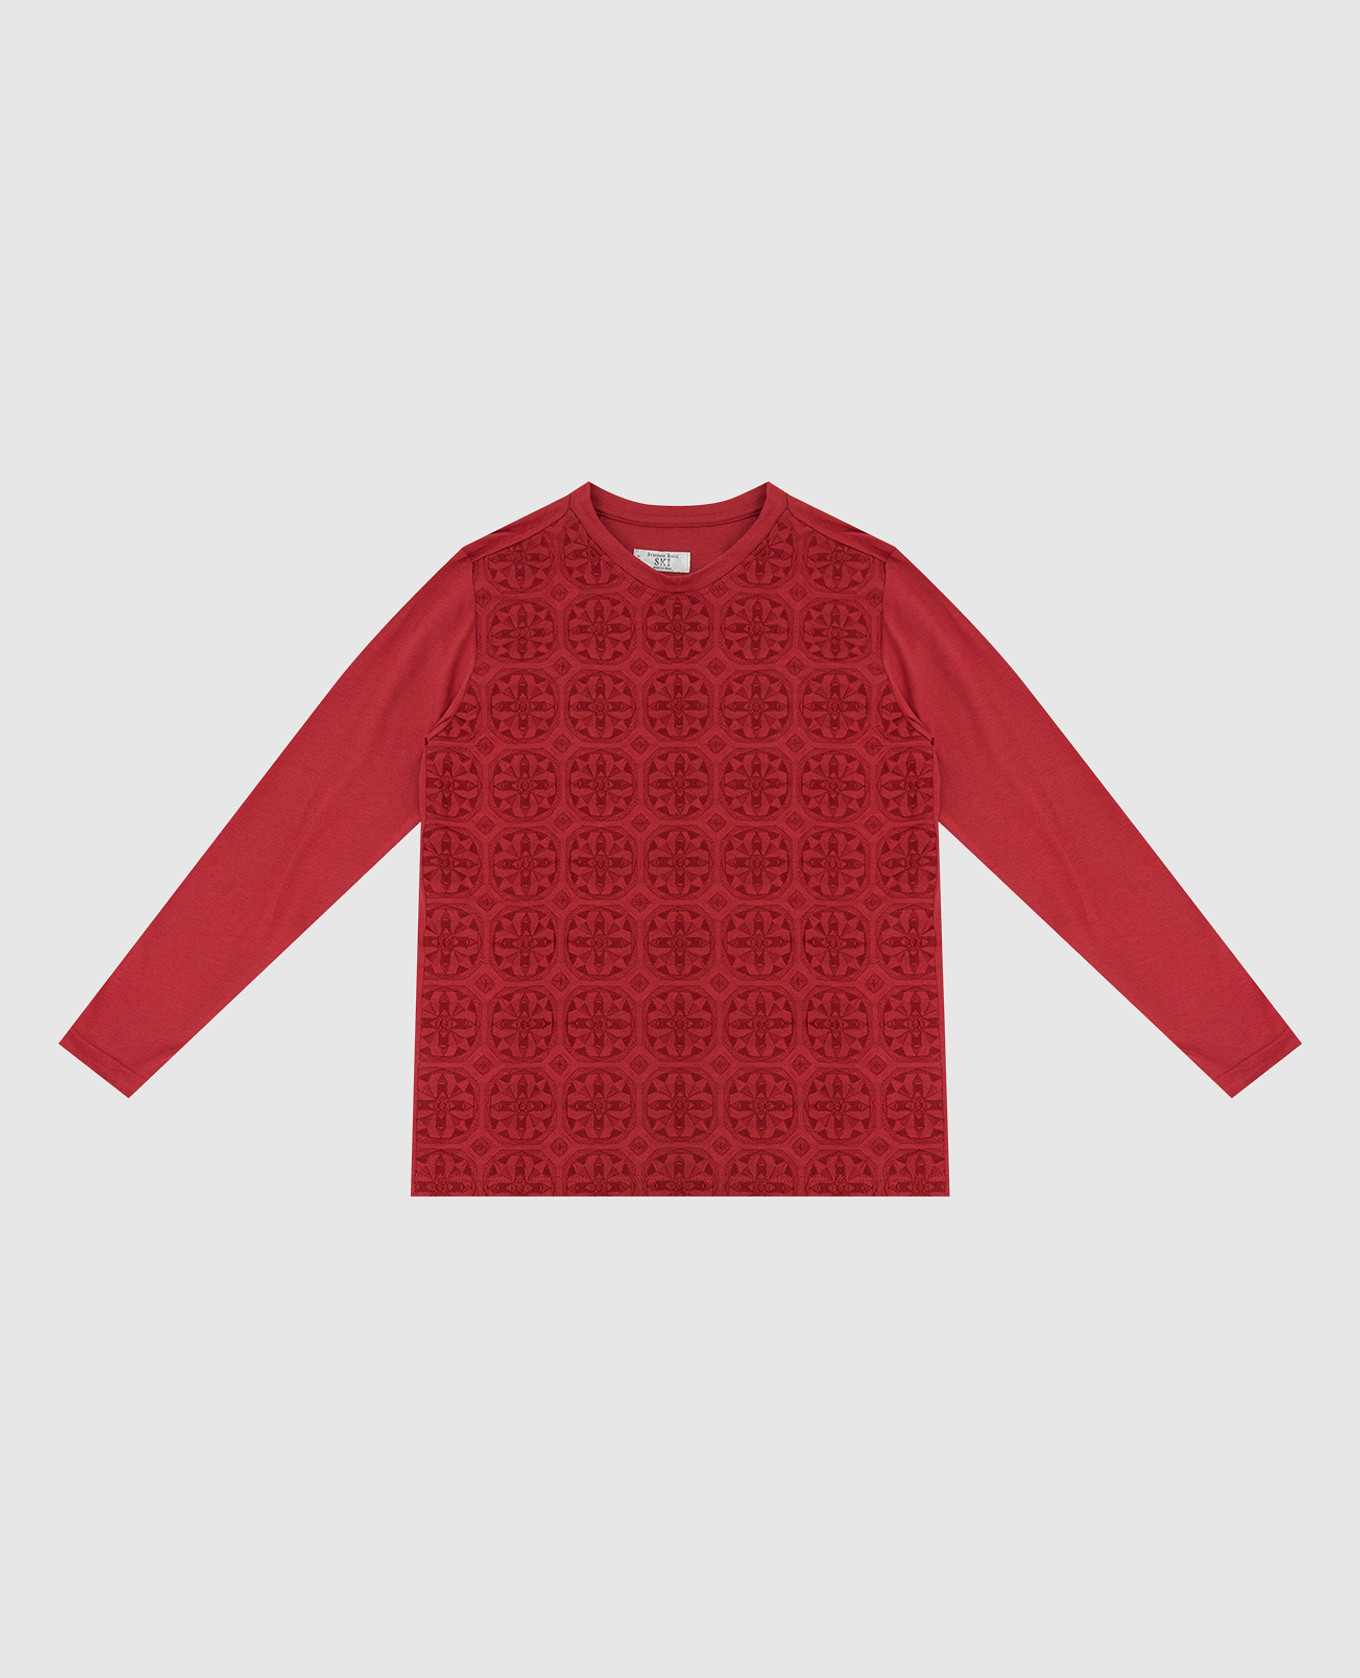 Children's red longsleeve with embroidery